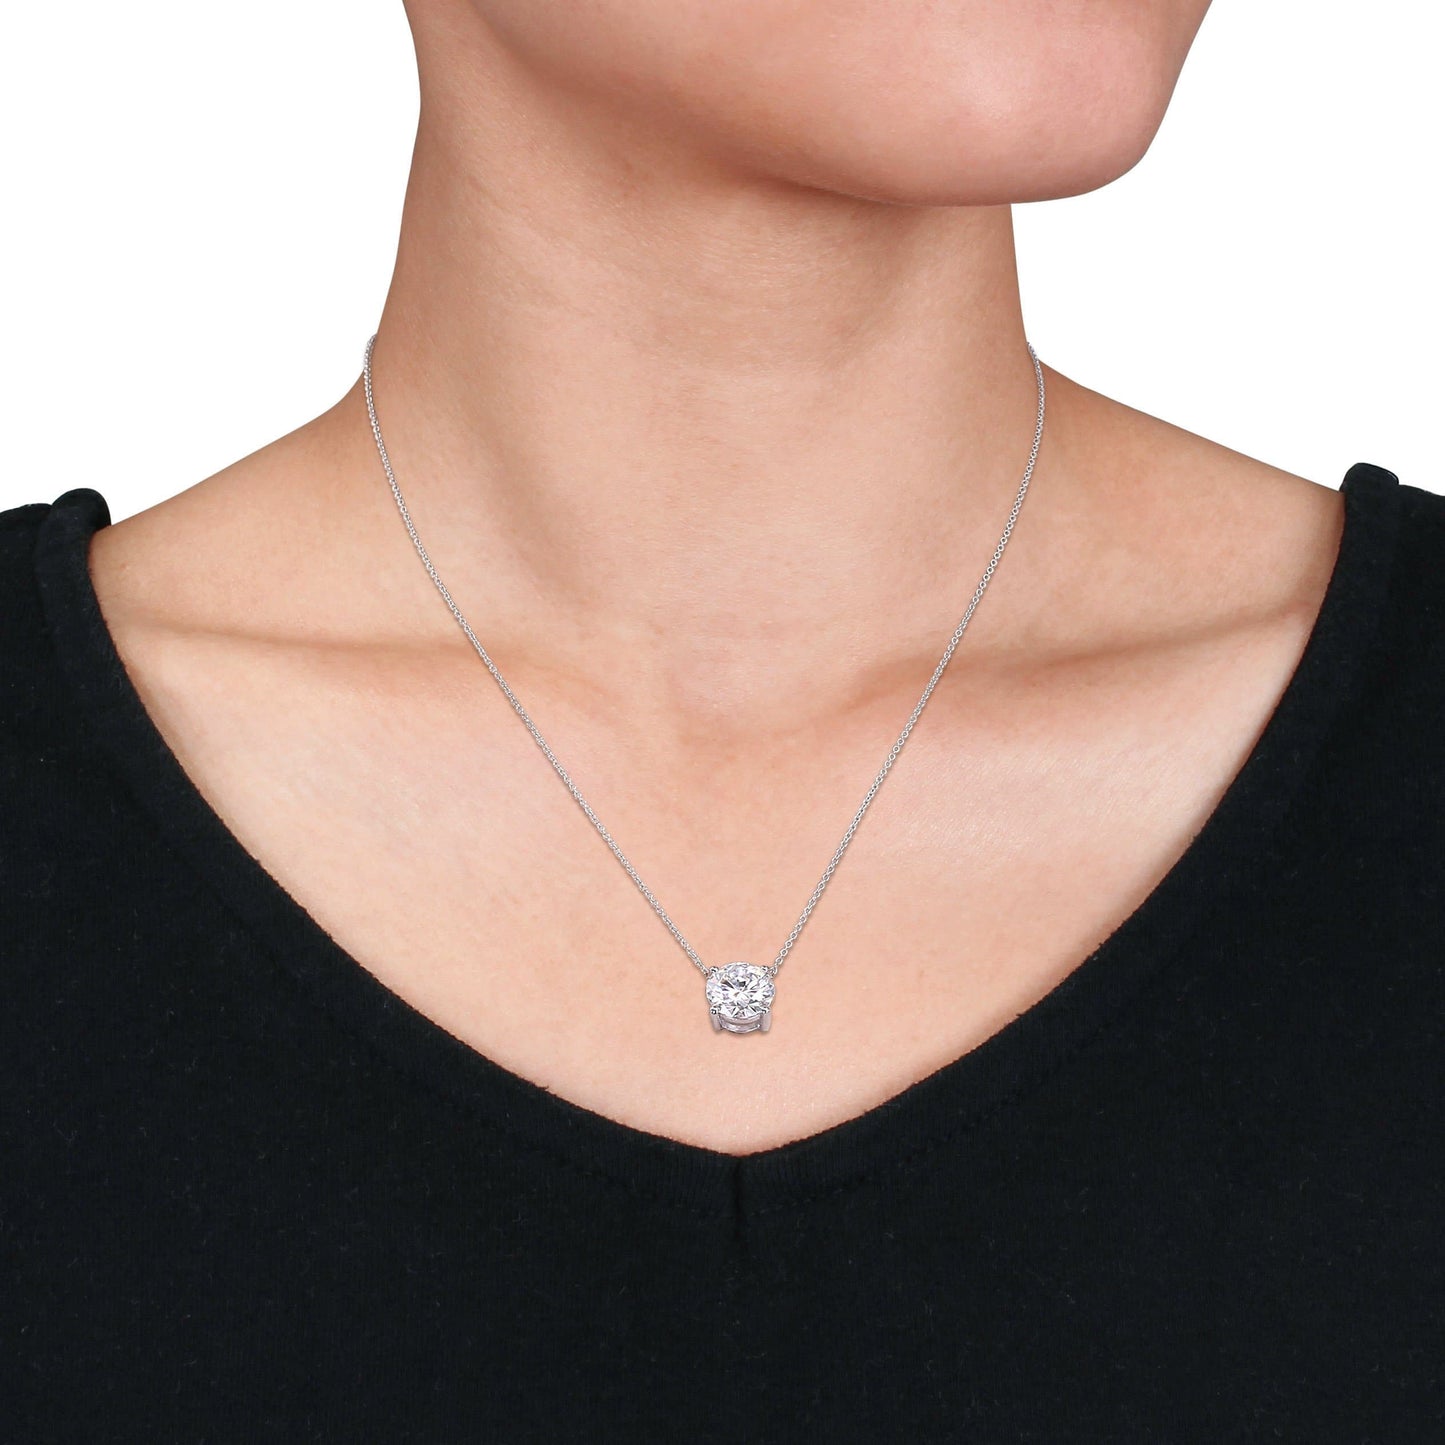 Round Cut Moissanite Necklace in 10k White Gold